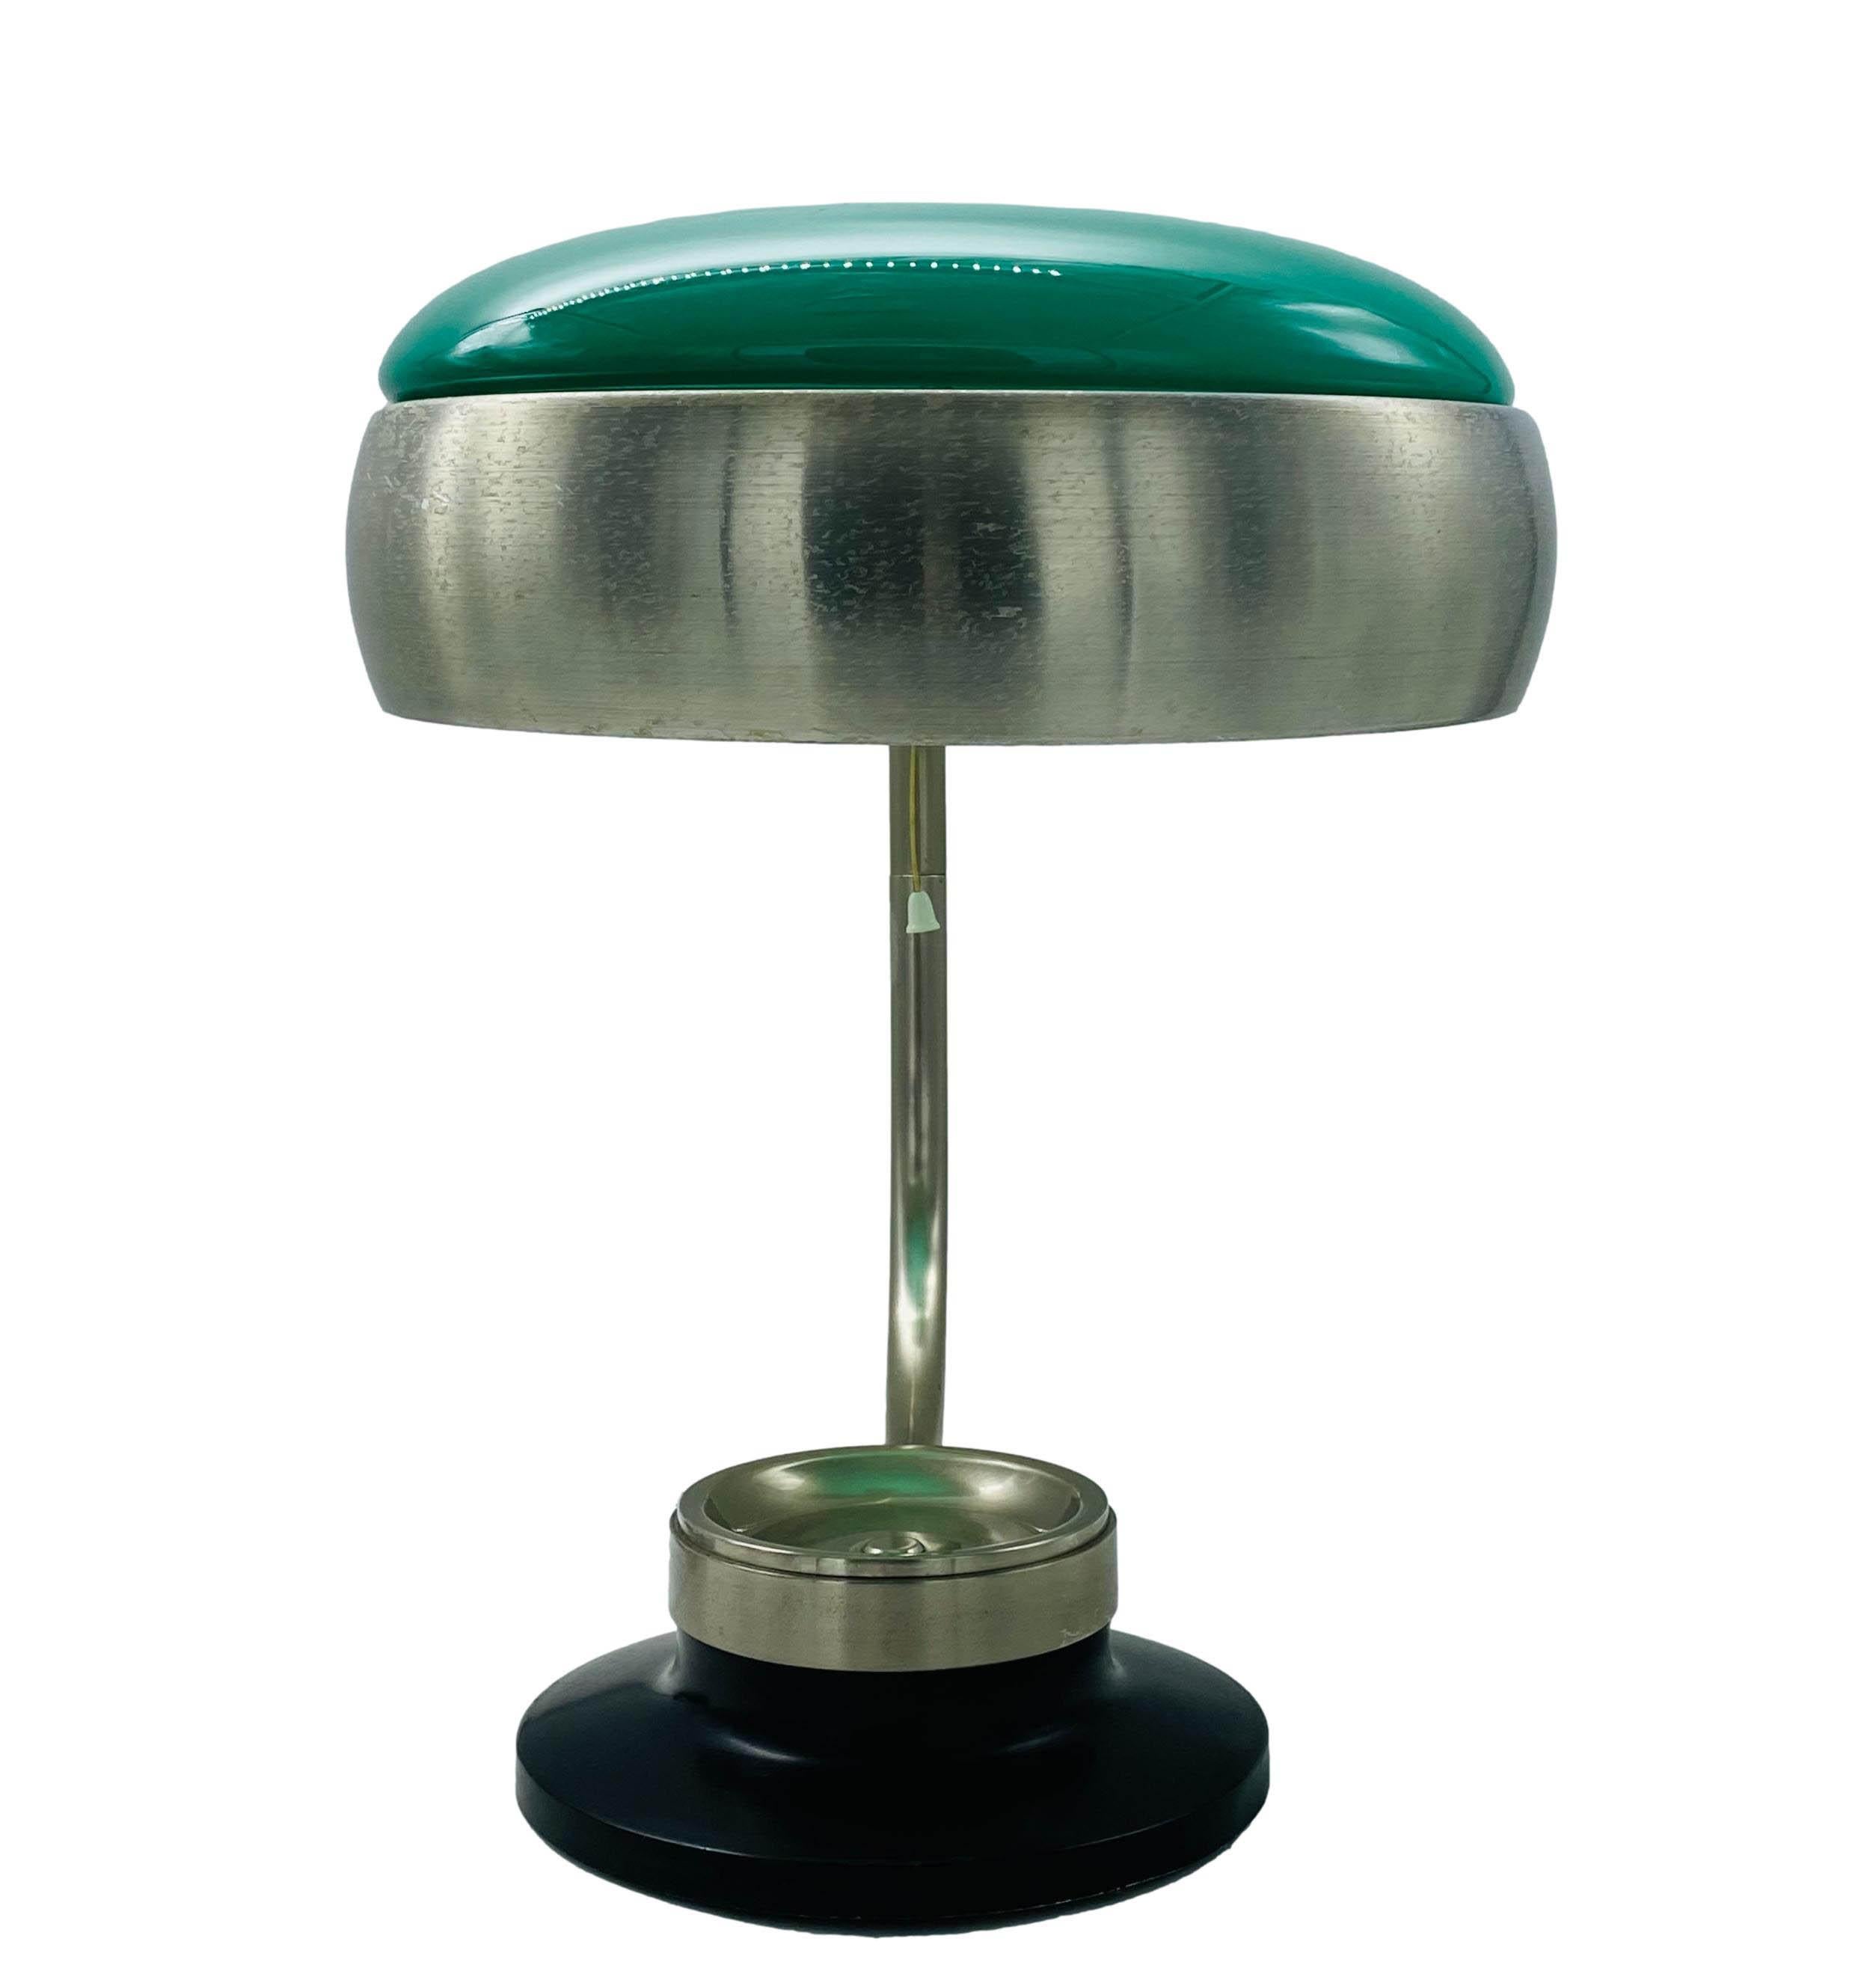 Rare table lamp Mod.729 in satin-finished brass, brushed aluminium and green glass, designed by Oscar Torlasco for Lumi Milano. Removable ashtray.